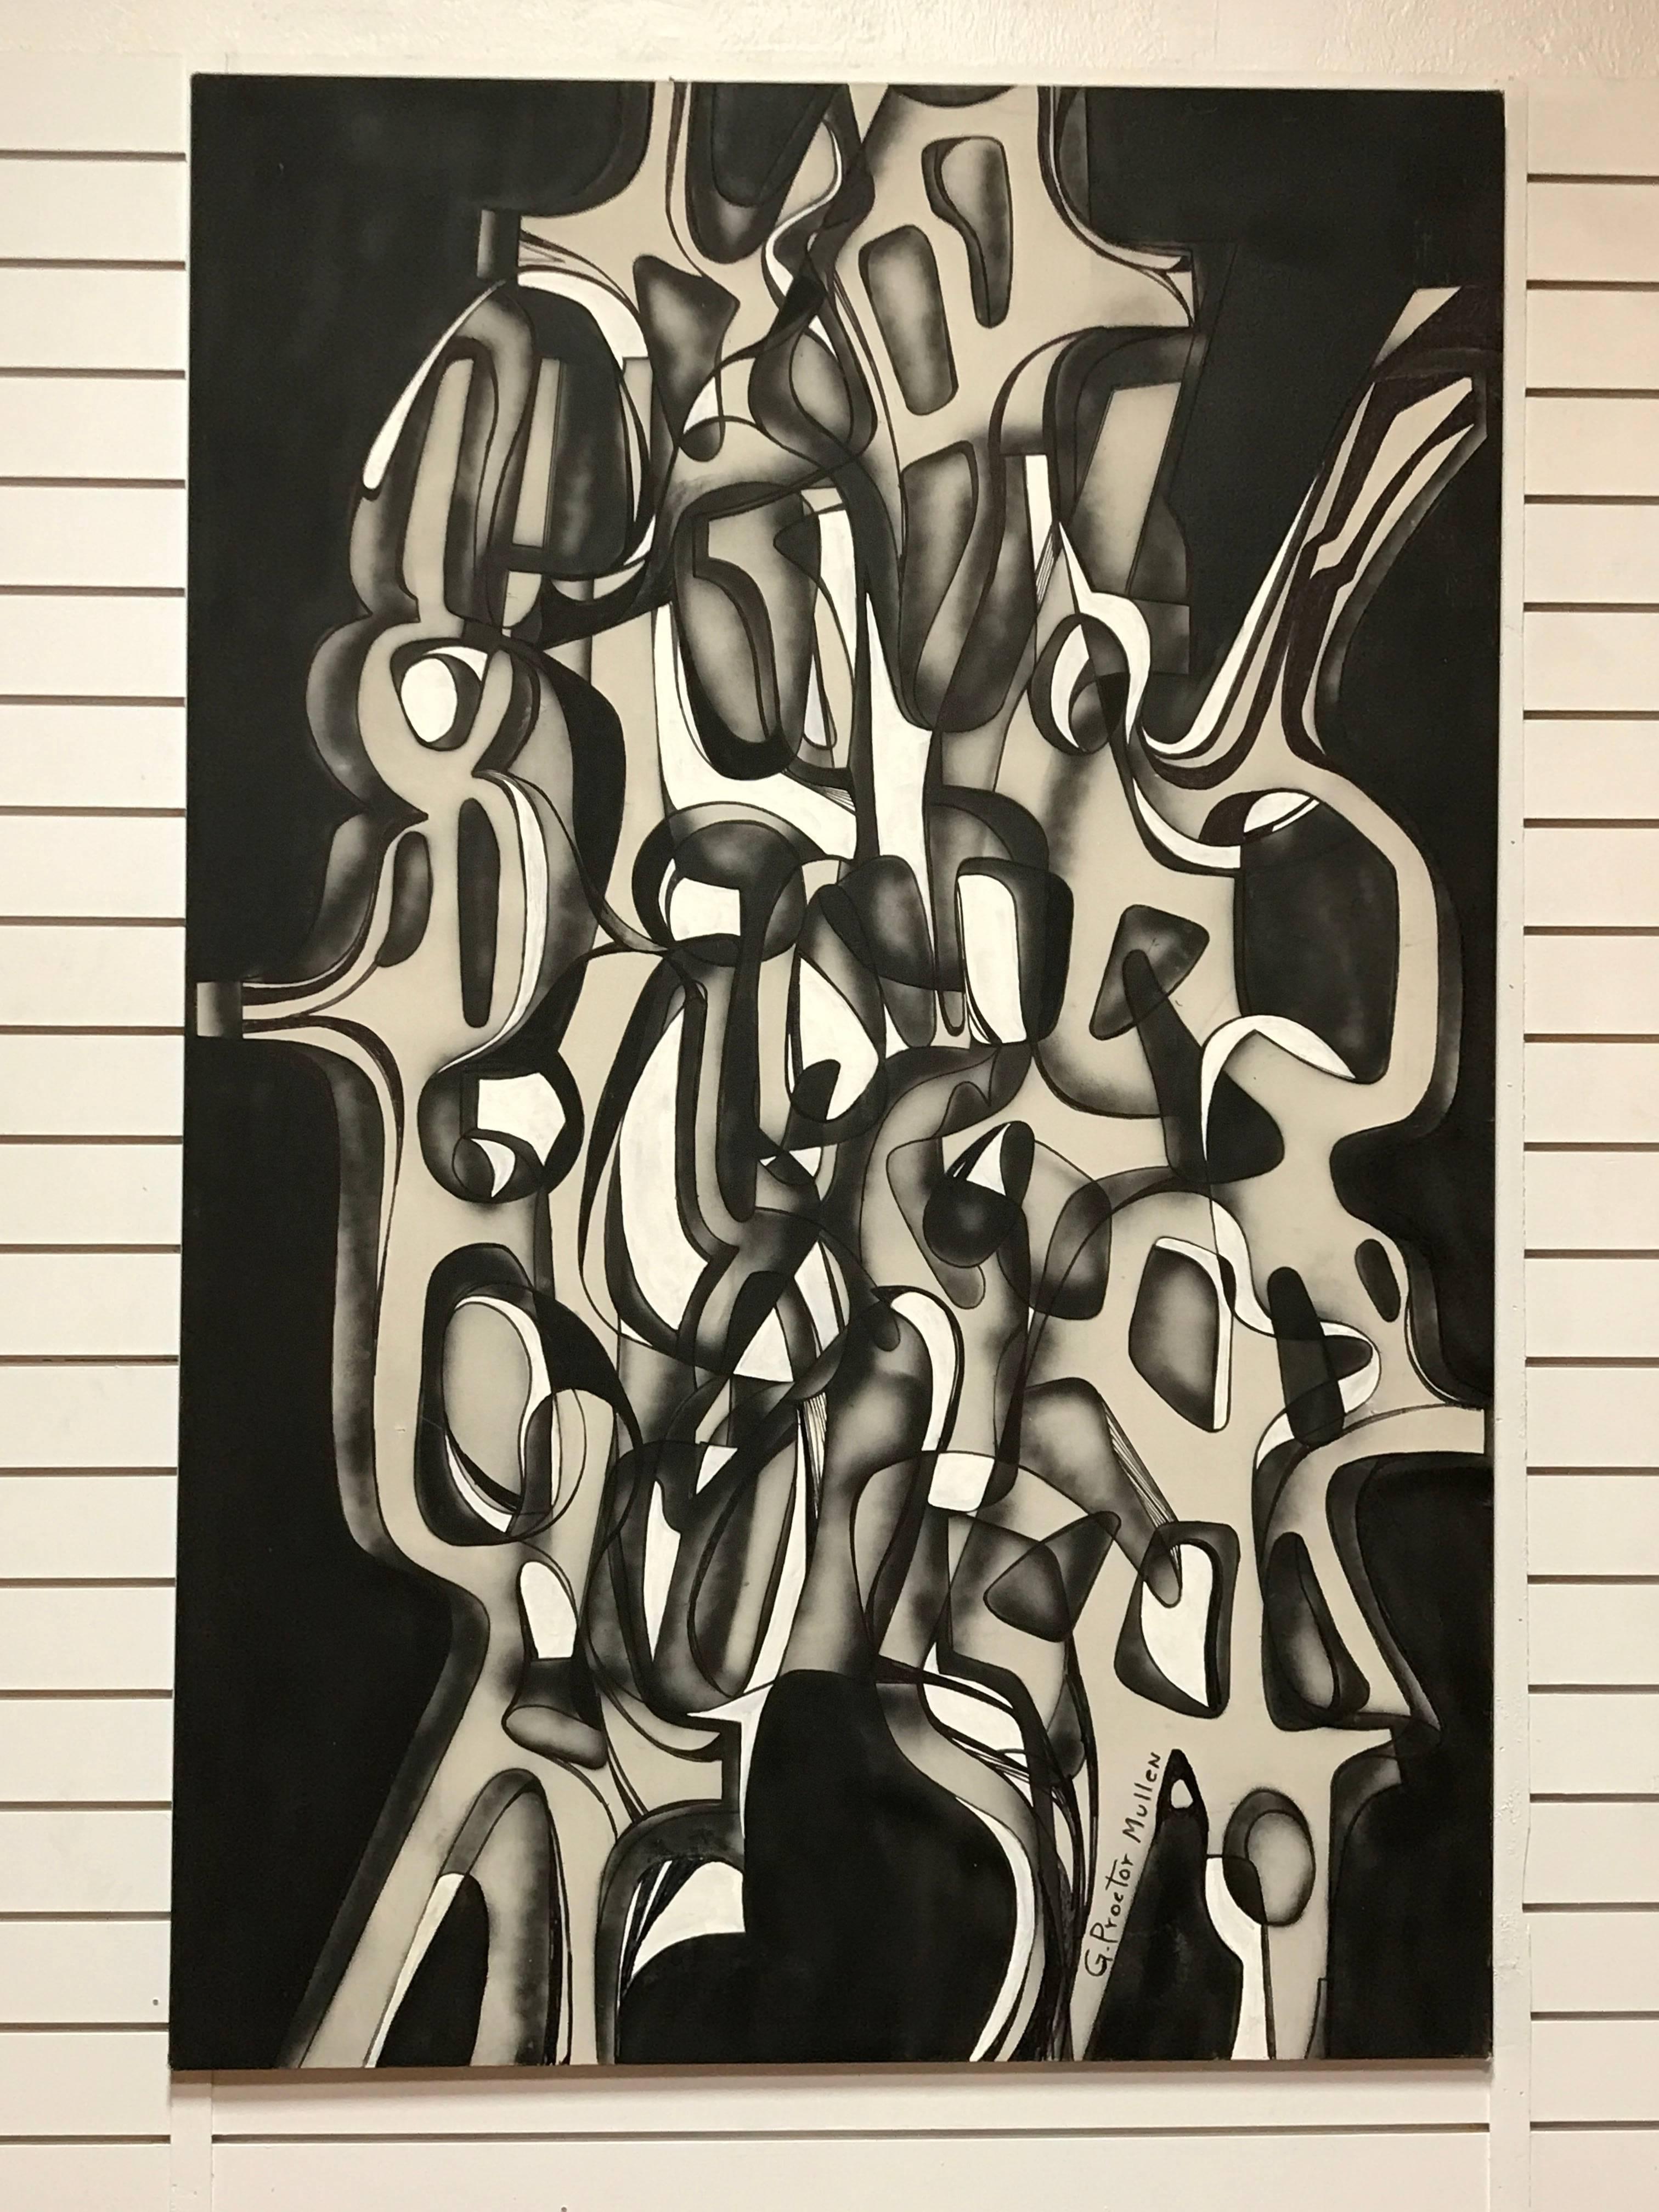 An abstract form in grey and white on a black background from multi-disciplinary artist George Mullen. 

A prolific artist formerly based in Santa Barbara, George Mullen produced not only large-scale paintings, but unique furniture of his own